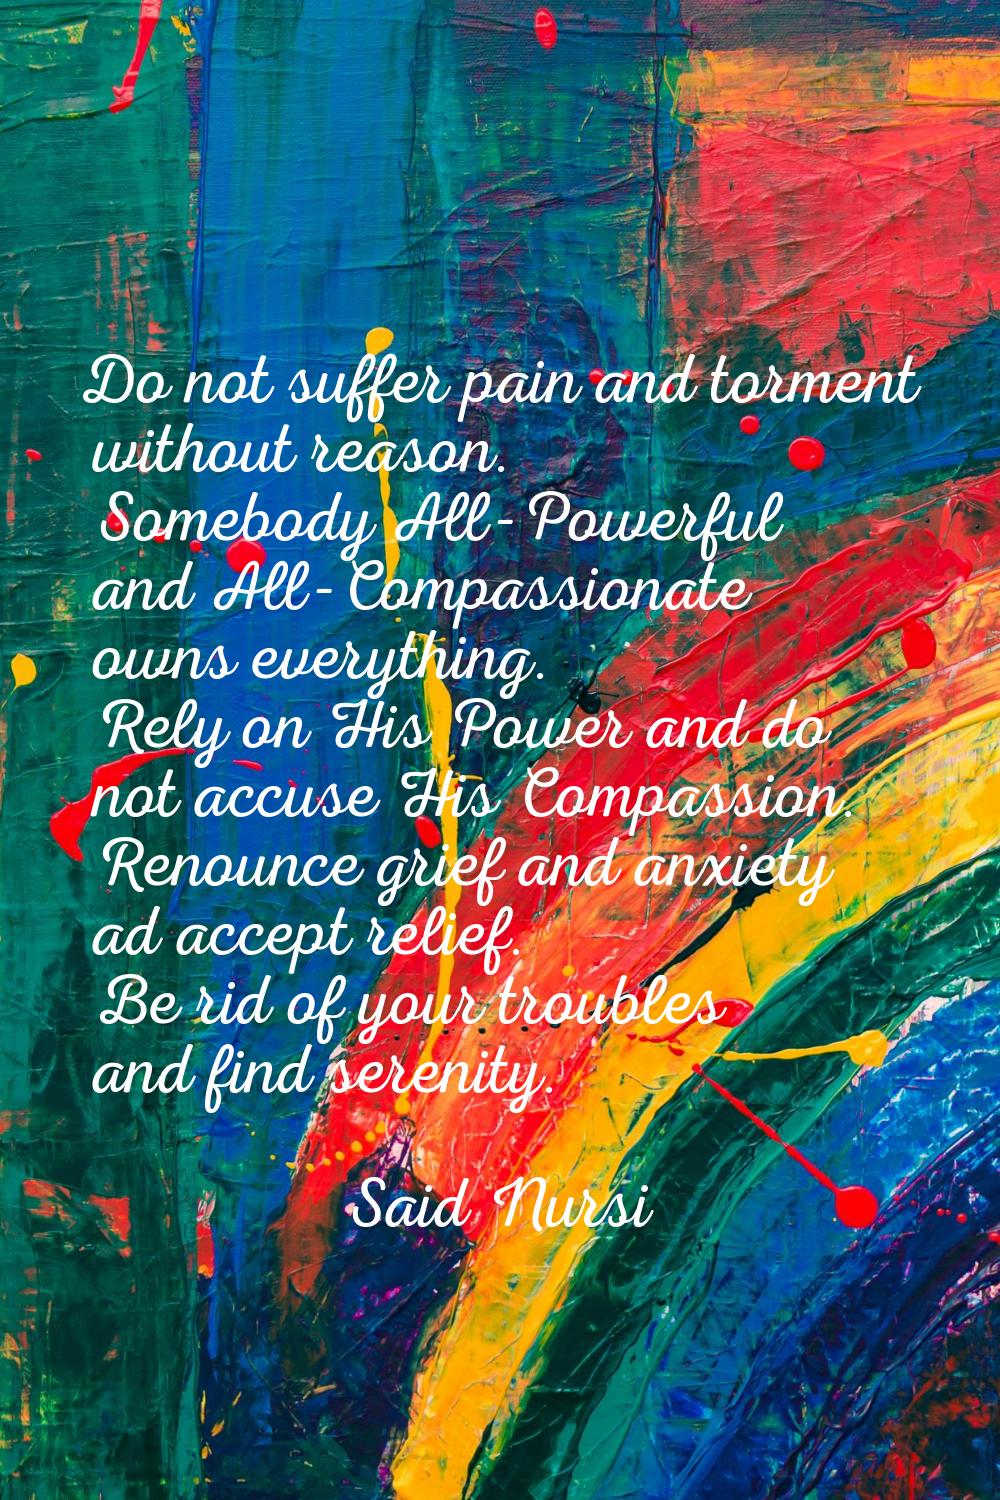 Do not suffer pain and torment without reason. Somebody All-Powerful and All-Compassionate owns eve